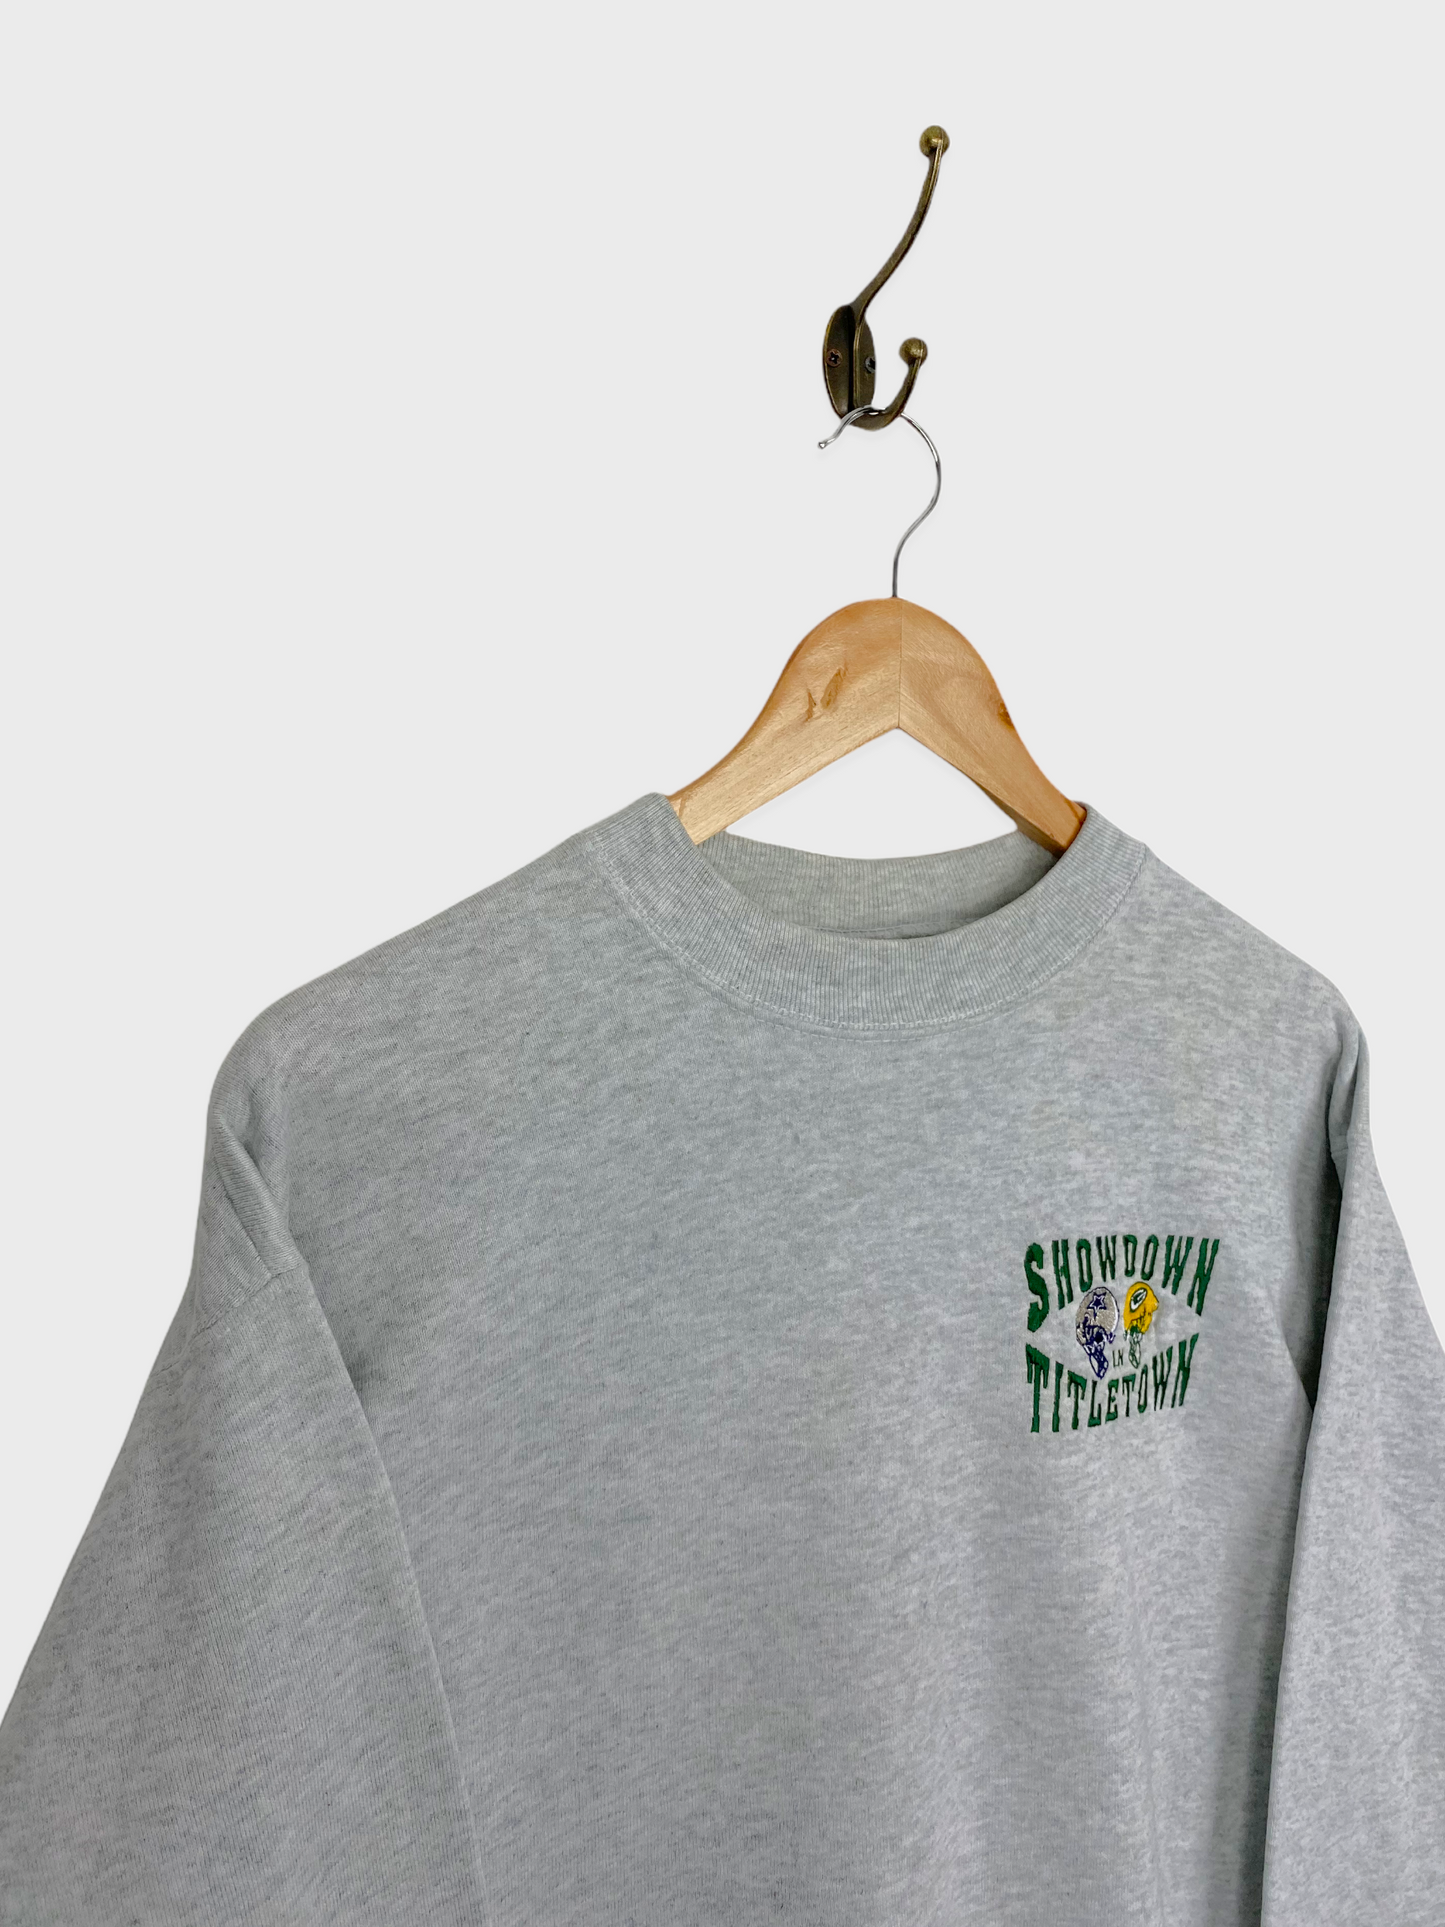 90's Packers vs Cowboys NFL Embroidered USA Made Vintage Sweatshirt Size 8